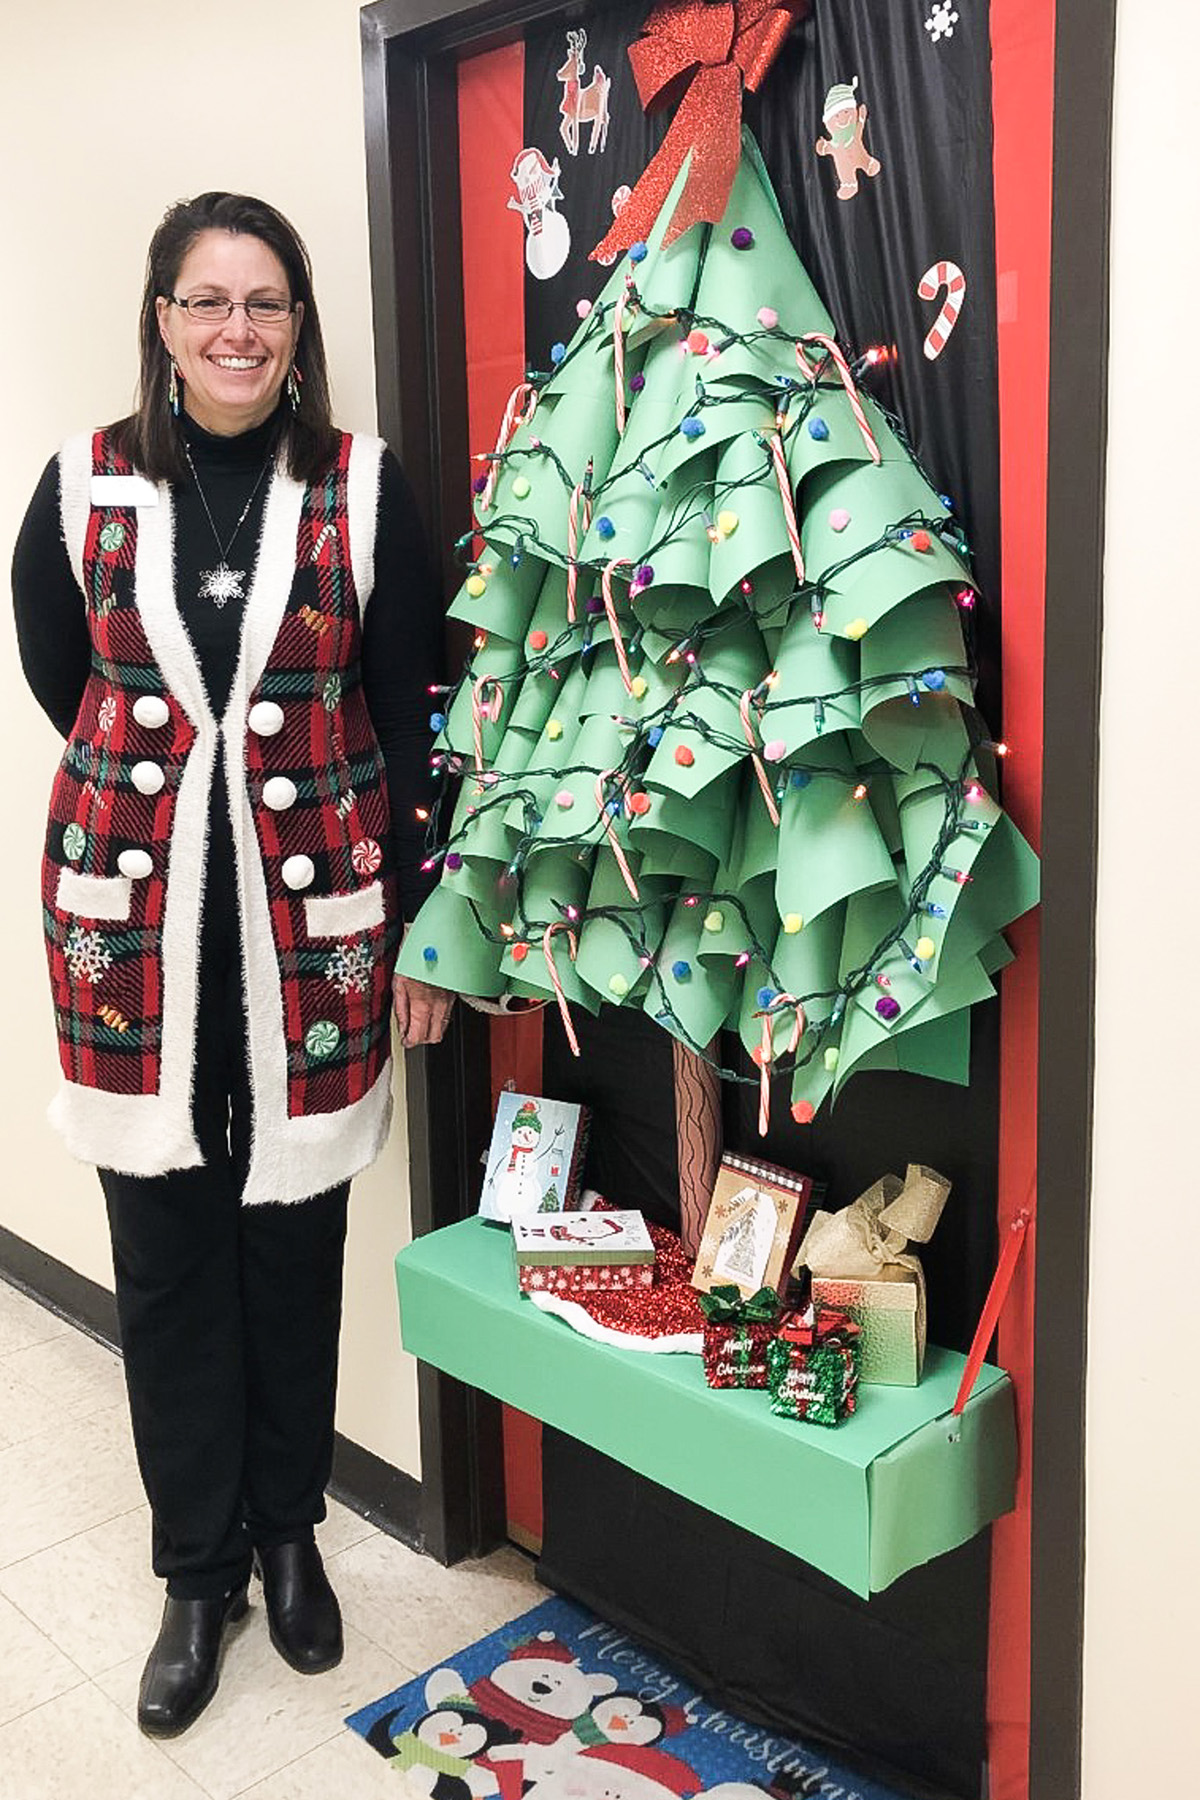 Sonya Sanderson, chair of the Health and Human Performance department at Middle Tennessee State University, helped launch a department-wide holiday door décor competition, and she won third place for her Christmas tree-themed door on the Thursday, Dec. 1, 2022, judging at the Murphy Center on campus. (Photo courtesy of Sonya Sanderson)